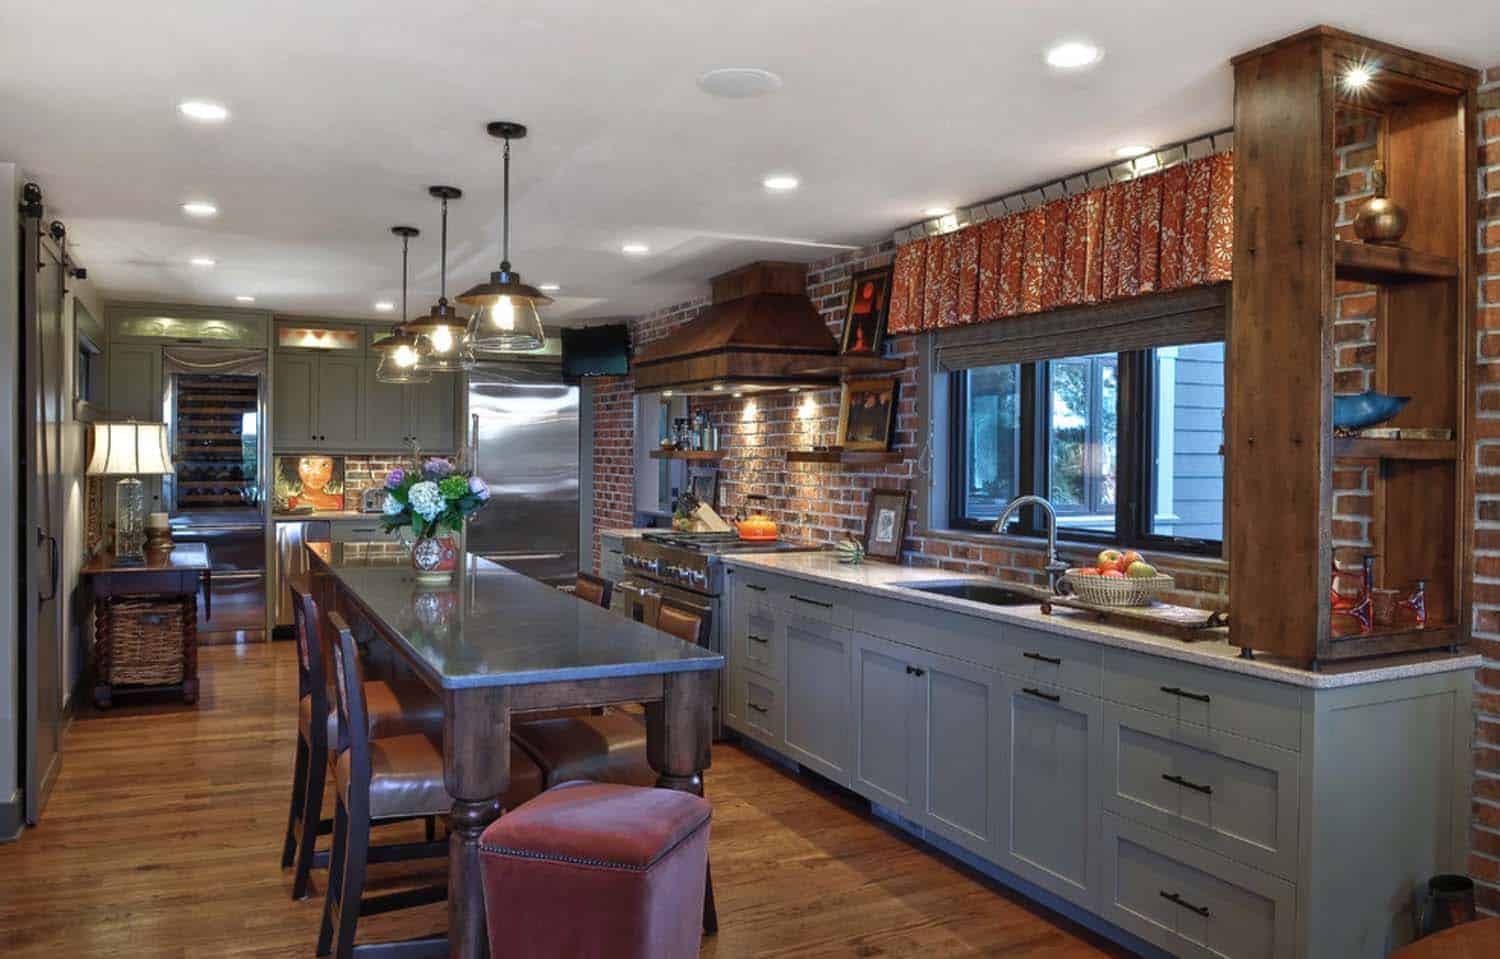 Amazing Country Chic Kitchens-33-1 Kindesign